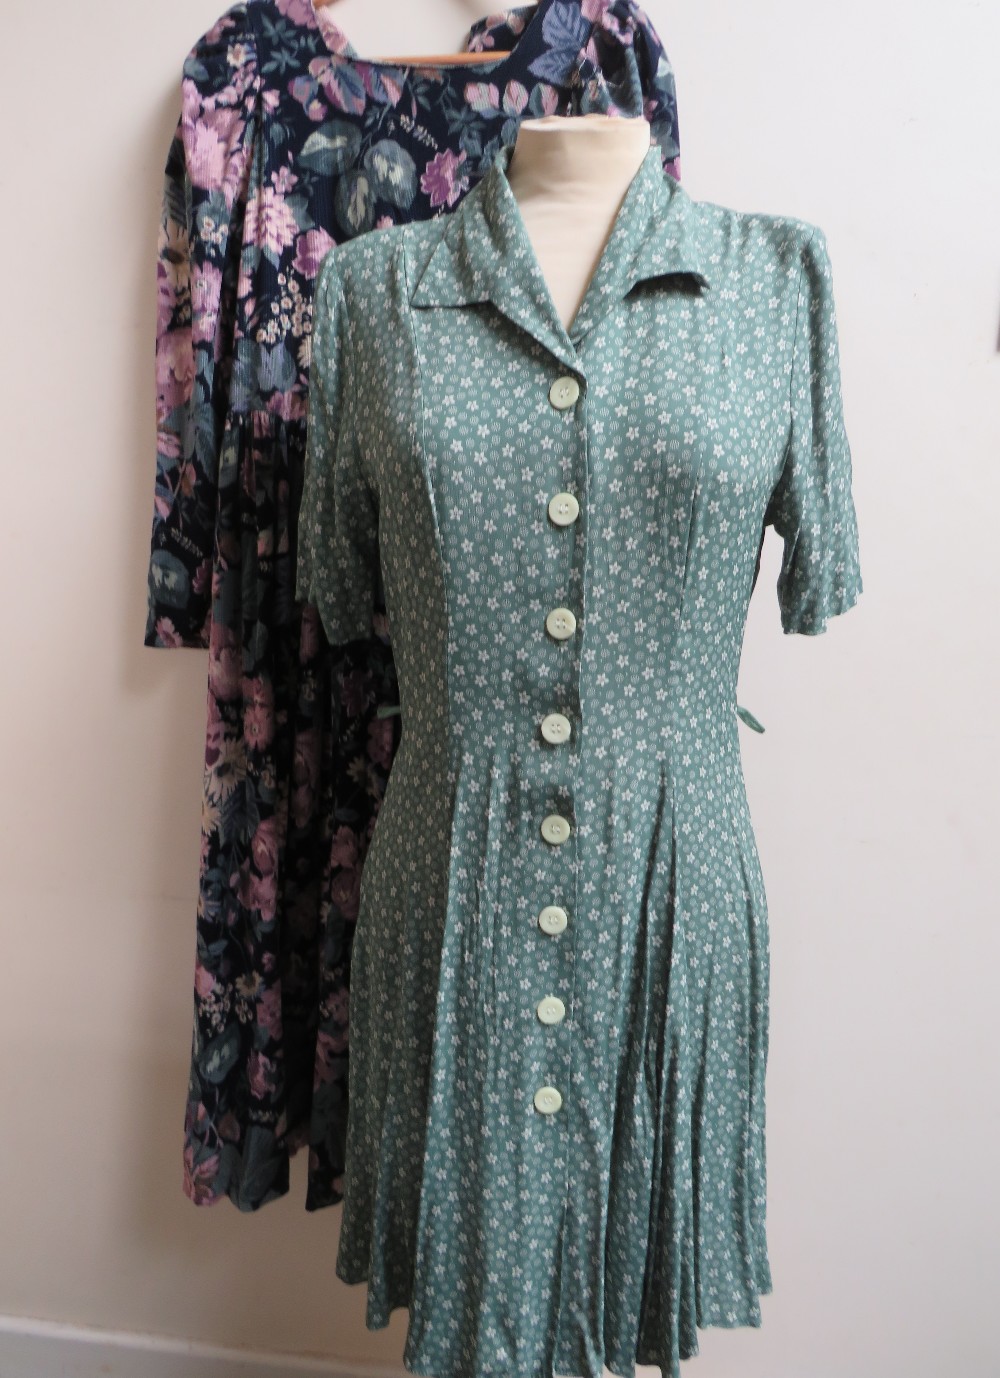 FOUR VINTAGE LAURA ASHLEY DRESSES, various styles and periods, three size 12 and the short green - Image 2 of 5